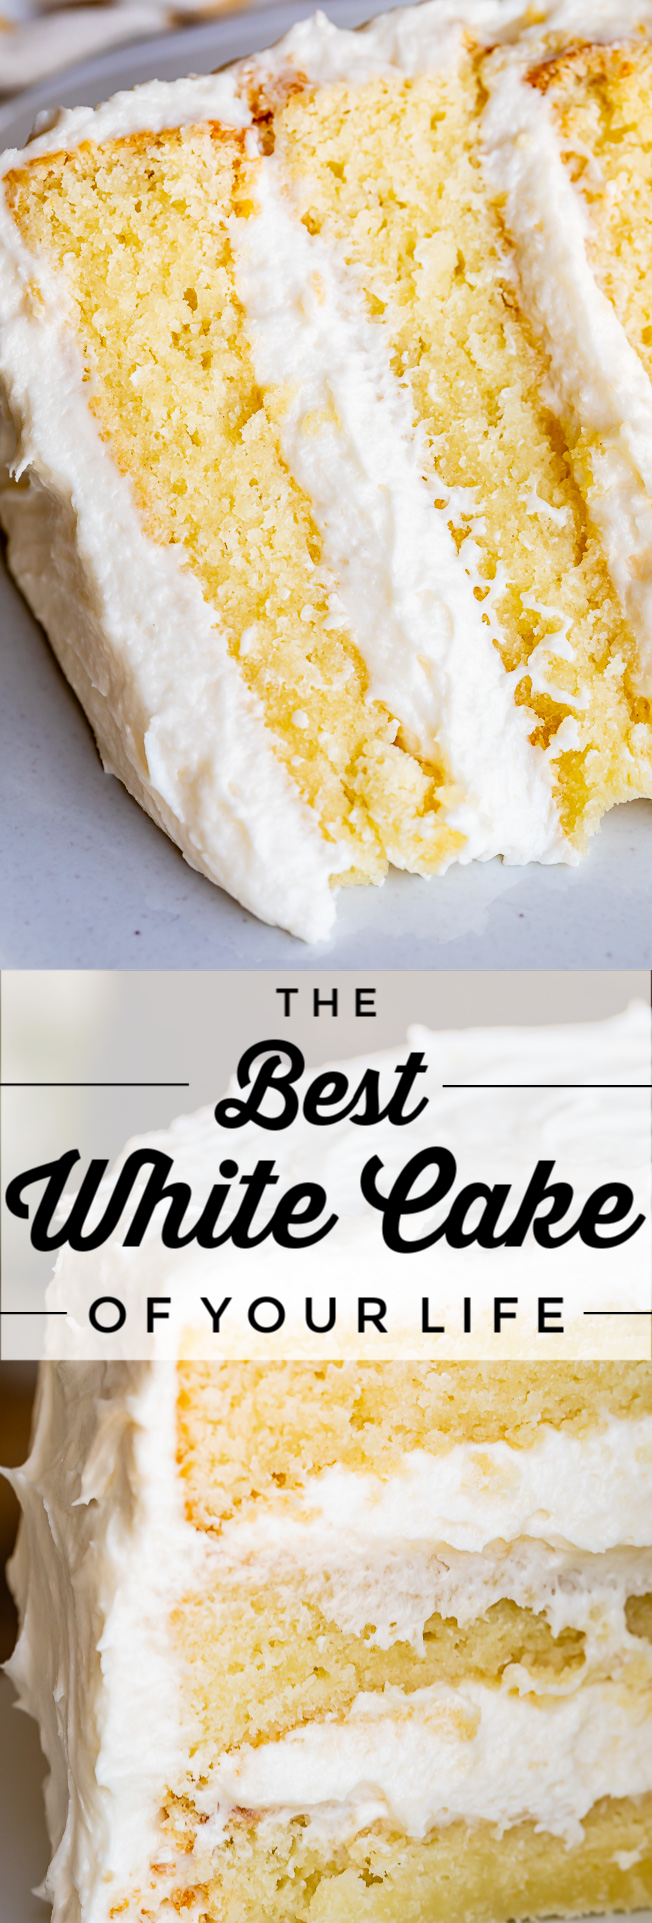 The Best Homemade White Cake Recipe of Your Life -   18 white cake Recipes ideas